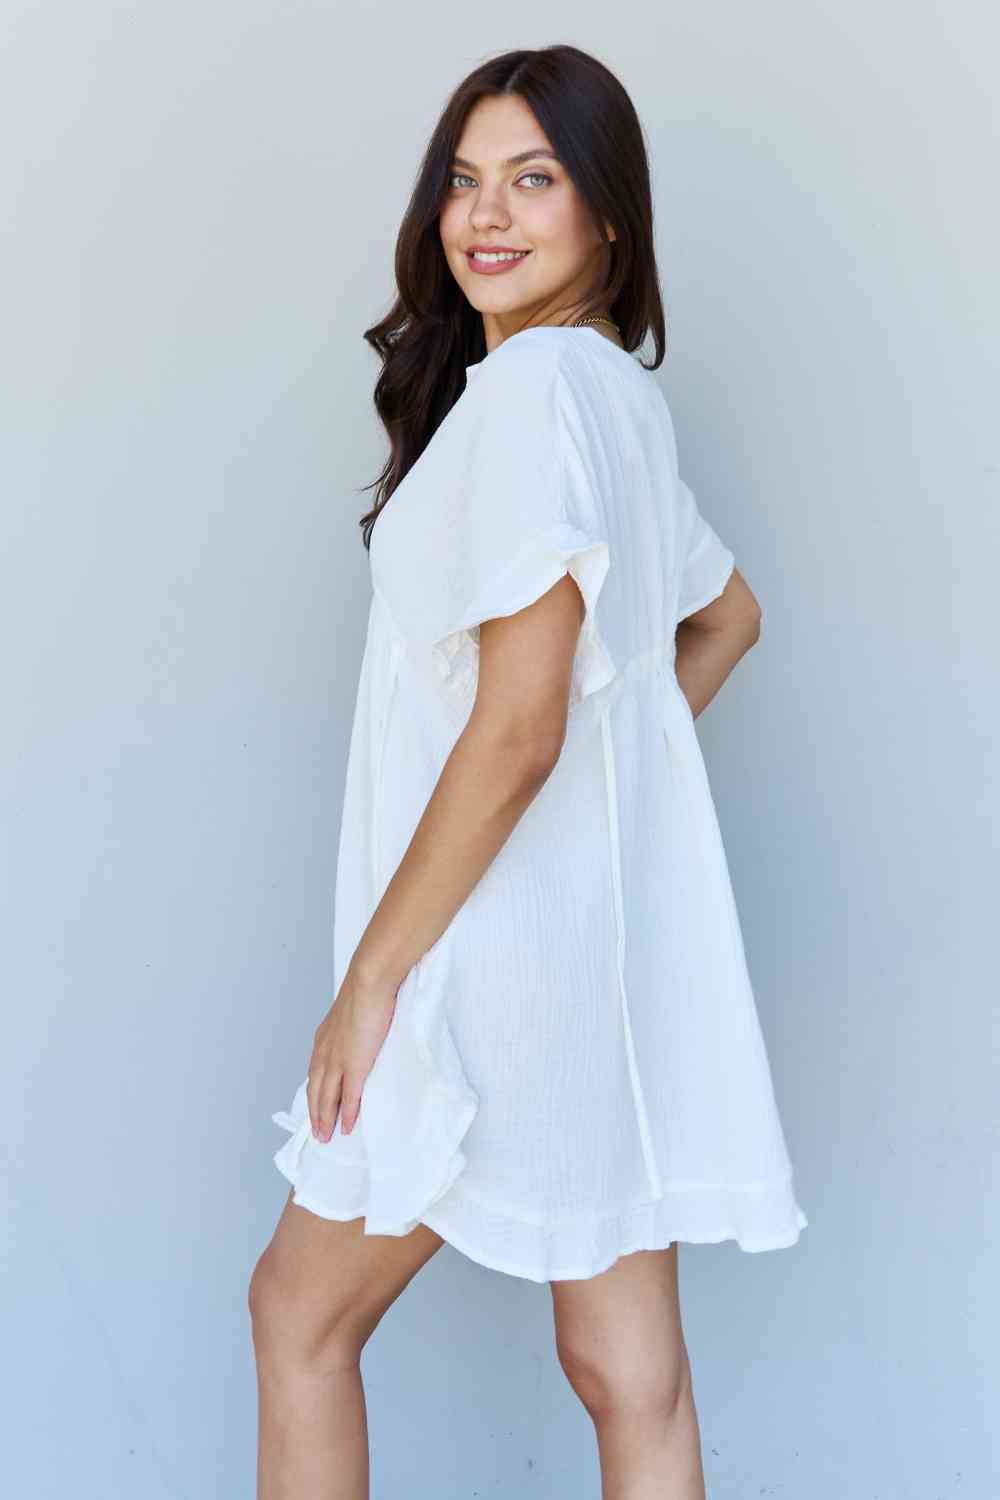 Ninexis Out Of Time Full Size Ruffle Hem Dress with Drawstring Waistband in White Print on any thing USA/STOD clothes